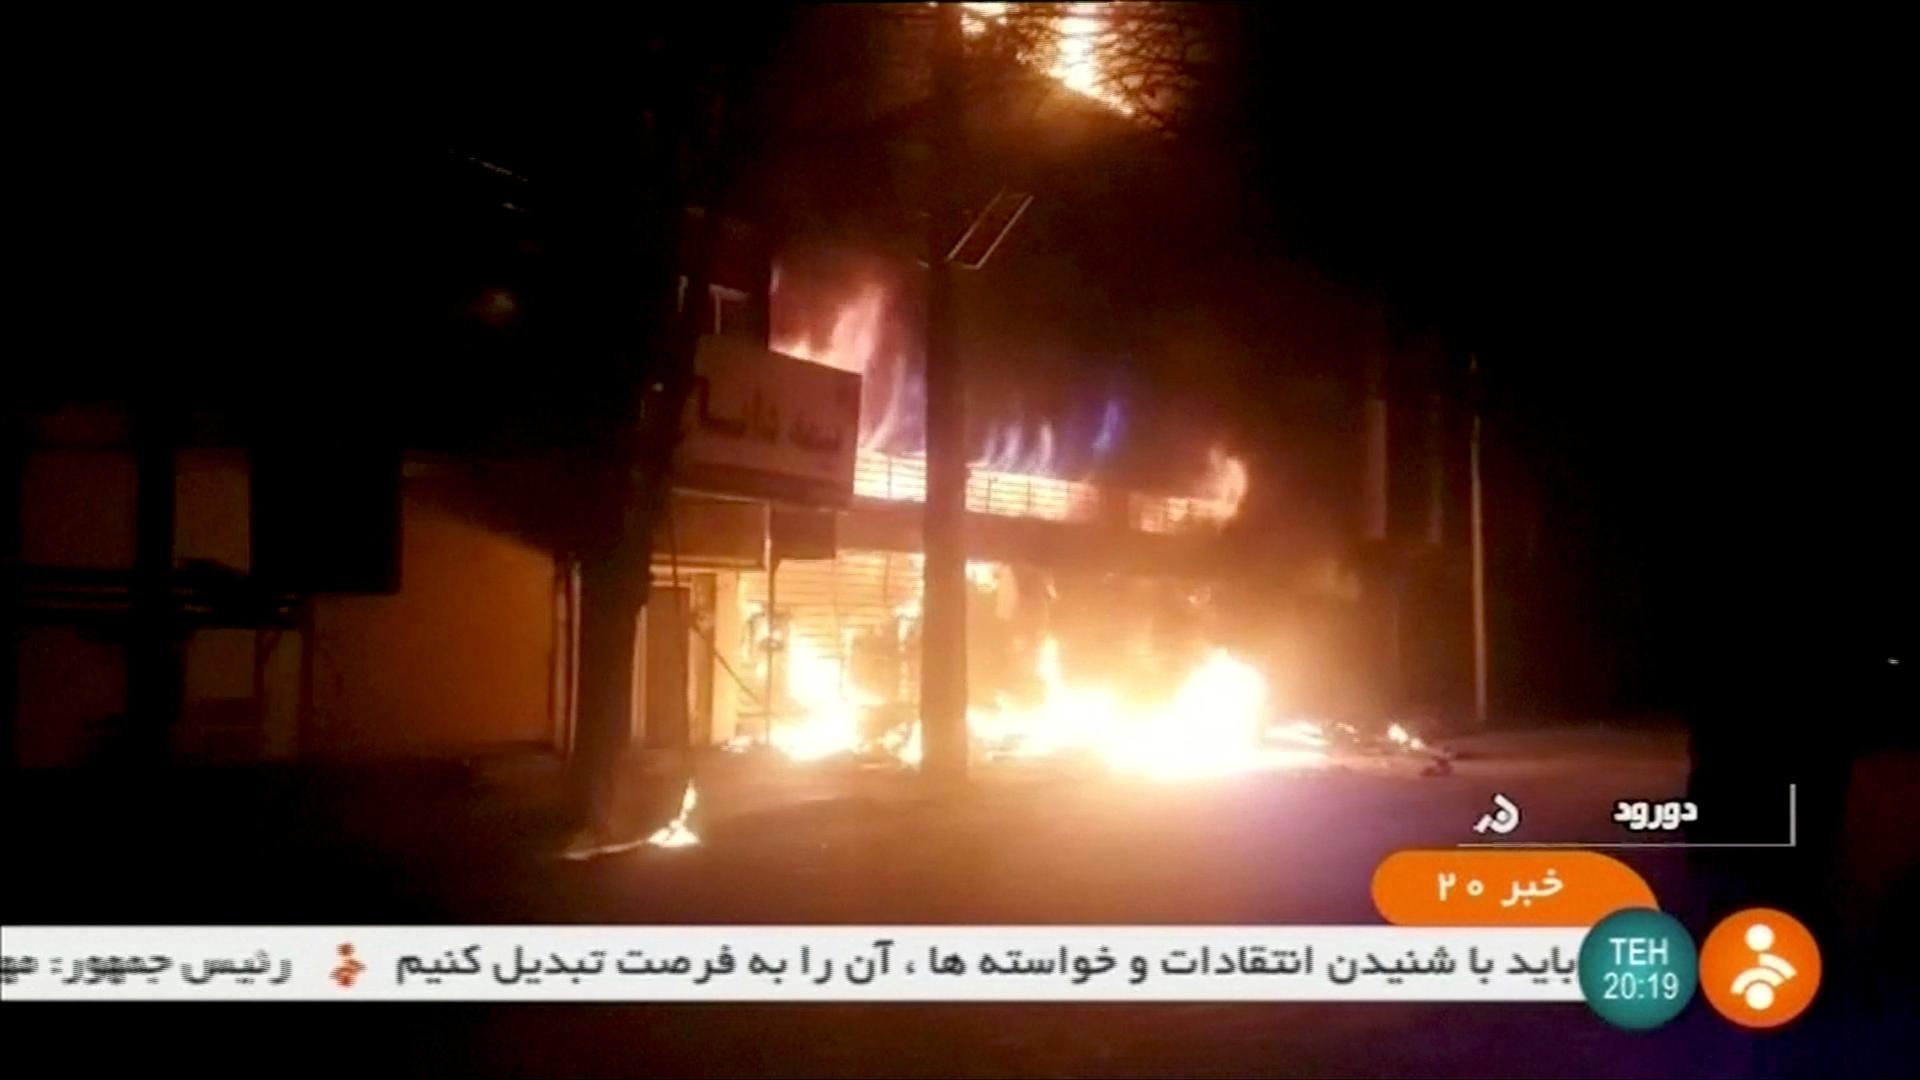 A building burns during street protests in Dorud, Iran.